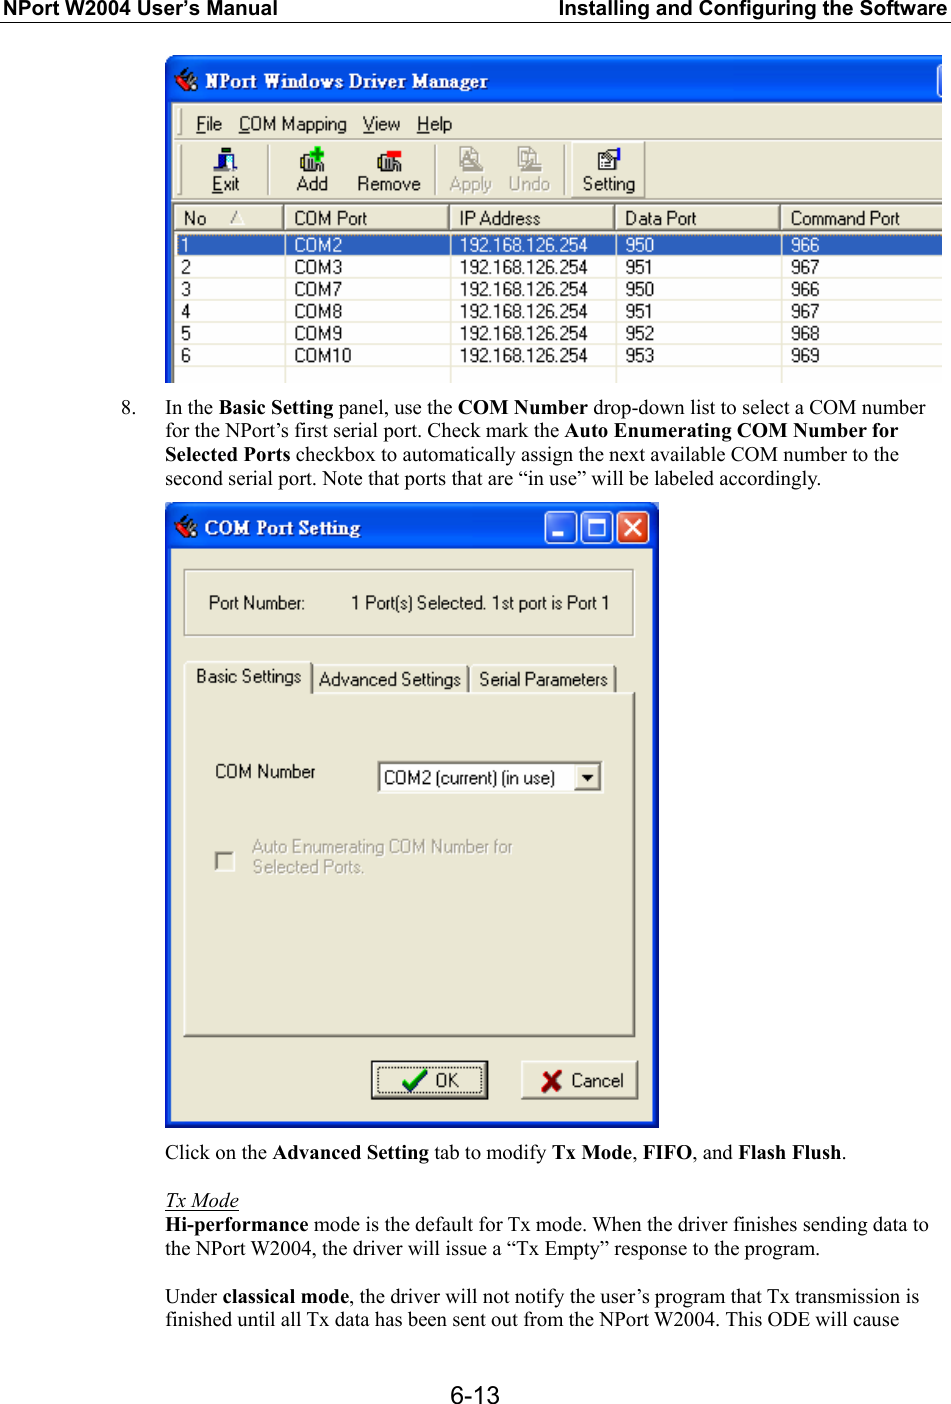 NPort W2004 User’s Manual  Installing and Configuring the Software  6-13 8. In the Basic Setting panel, use the COM Number drop-down list to select a COM number for the NPort’s first serial port. Check mark the Auto Enumerating COM Number for Selected Ports checkbox to automatically assign the next available COM number to the second serial port. Note that ports that are “in use” will be labeled accordingly.  Click on the Advanced Setting tab to modify Tx Mode, FIFO, and Flash Flush.  Tx Mode Hi-performance mode is the default for Tx mode. When the driver finishes sending data to the NPort W2004, the driver will issue a “Tx Empty” response to the program.  Under classical mode, the driver will not notify the user’s program that Tx transmission is finished until all Tx data has been sent out from the NPort W2004. This ODE will cause 